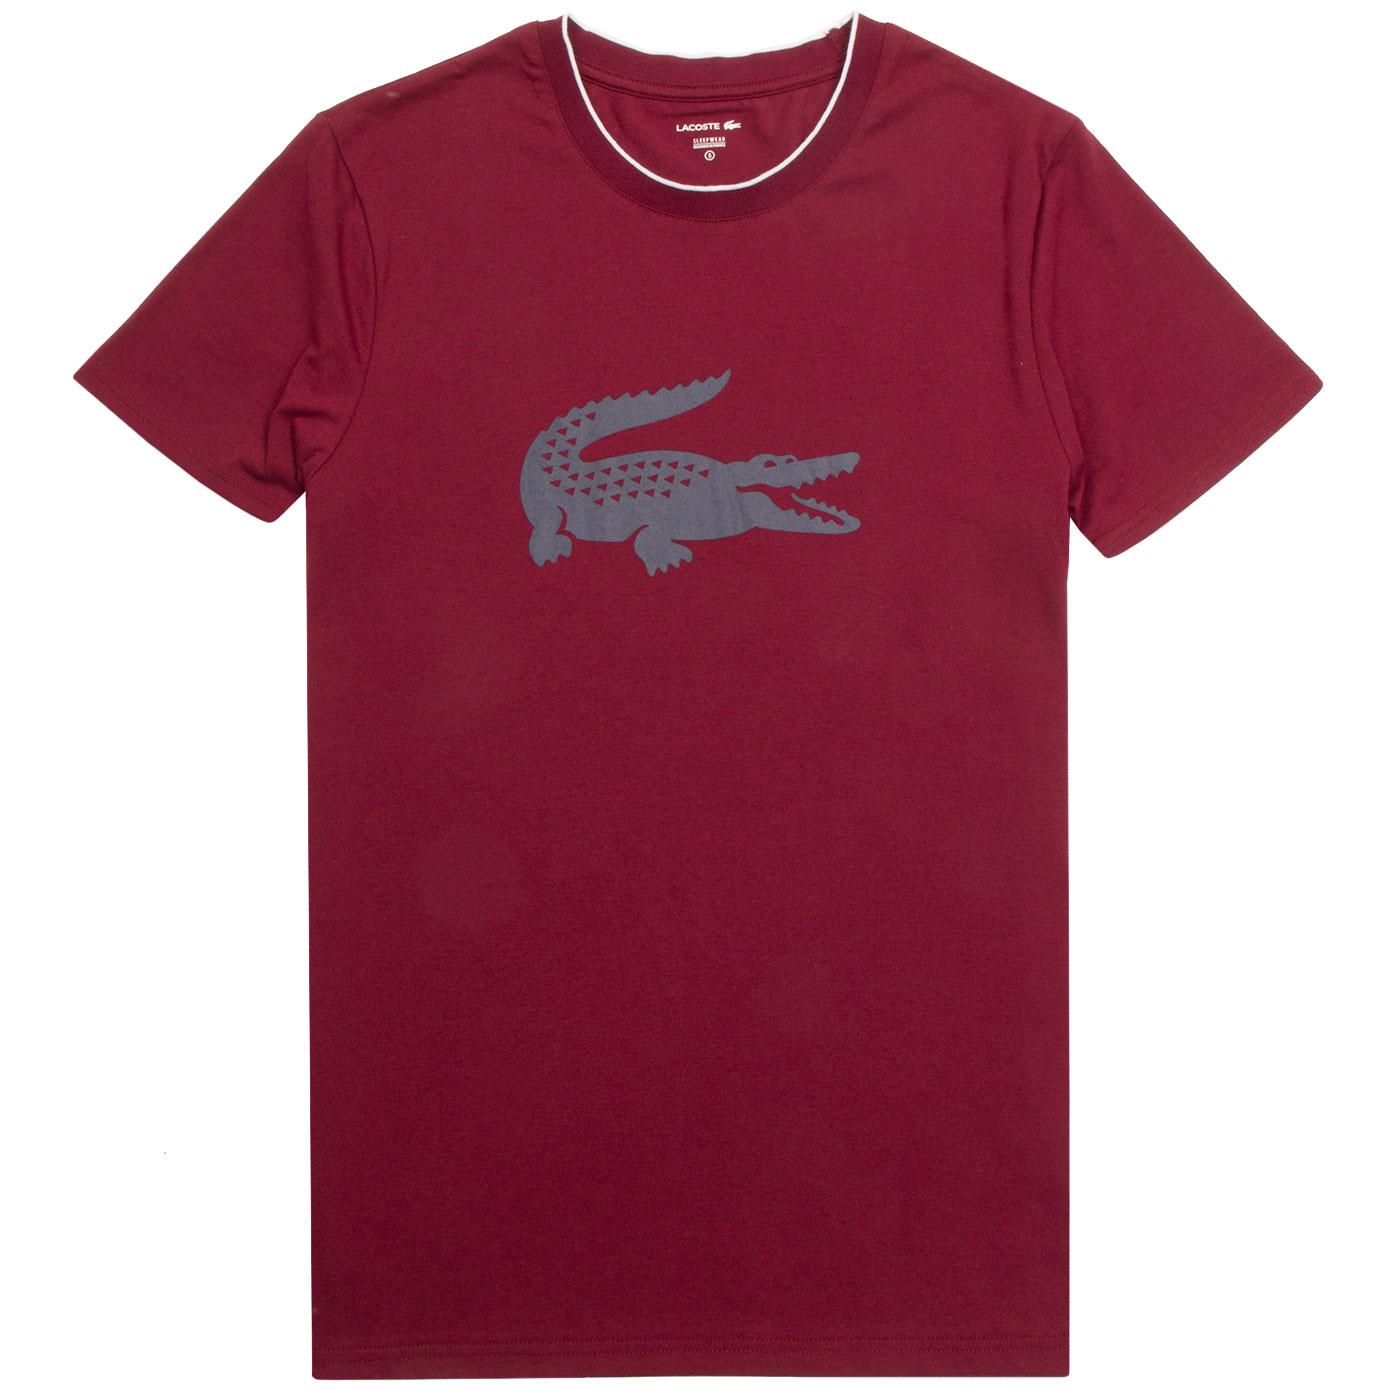 LACOSTE Retro Tipped Crew Neck Loungewear Tee DR